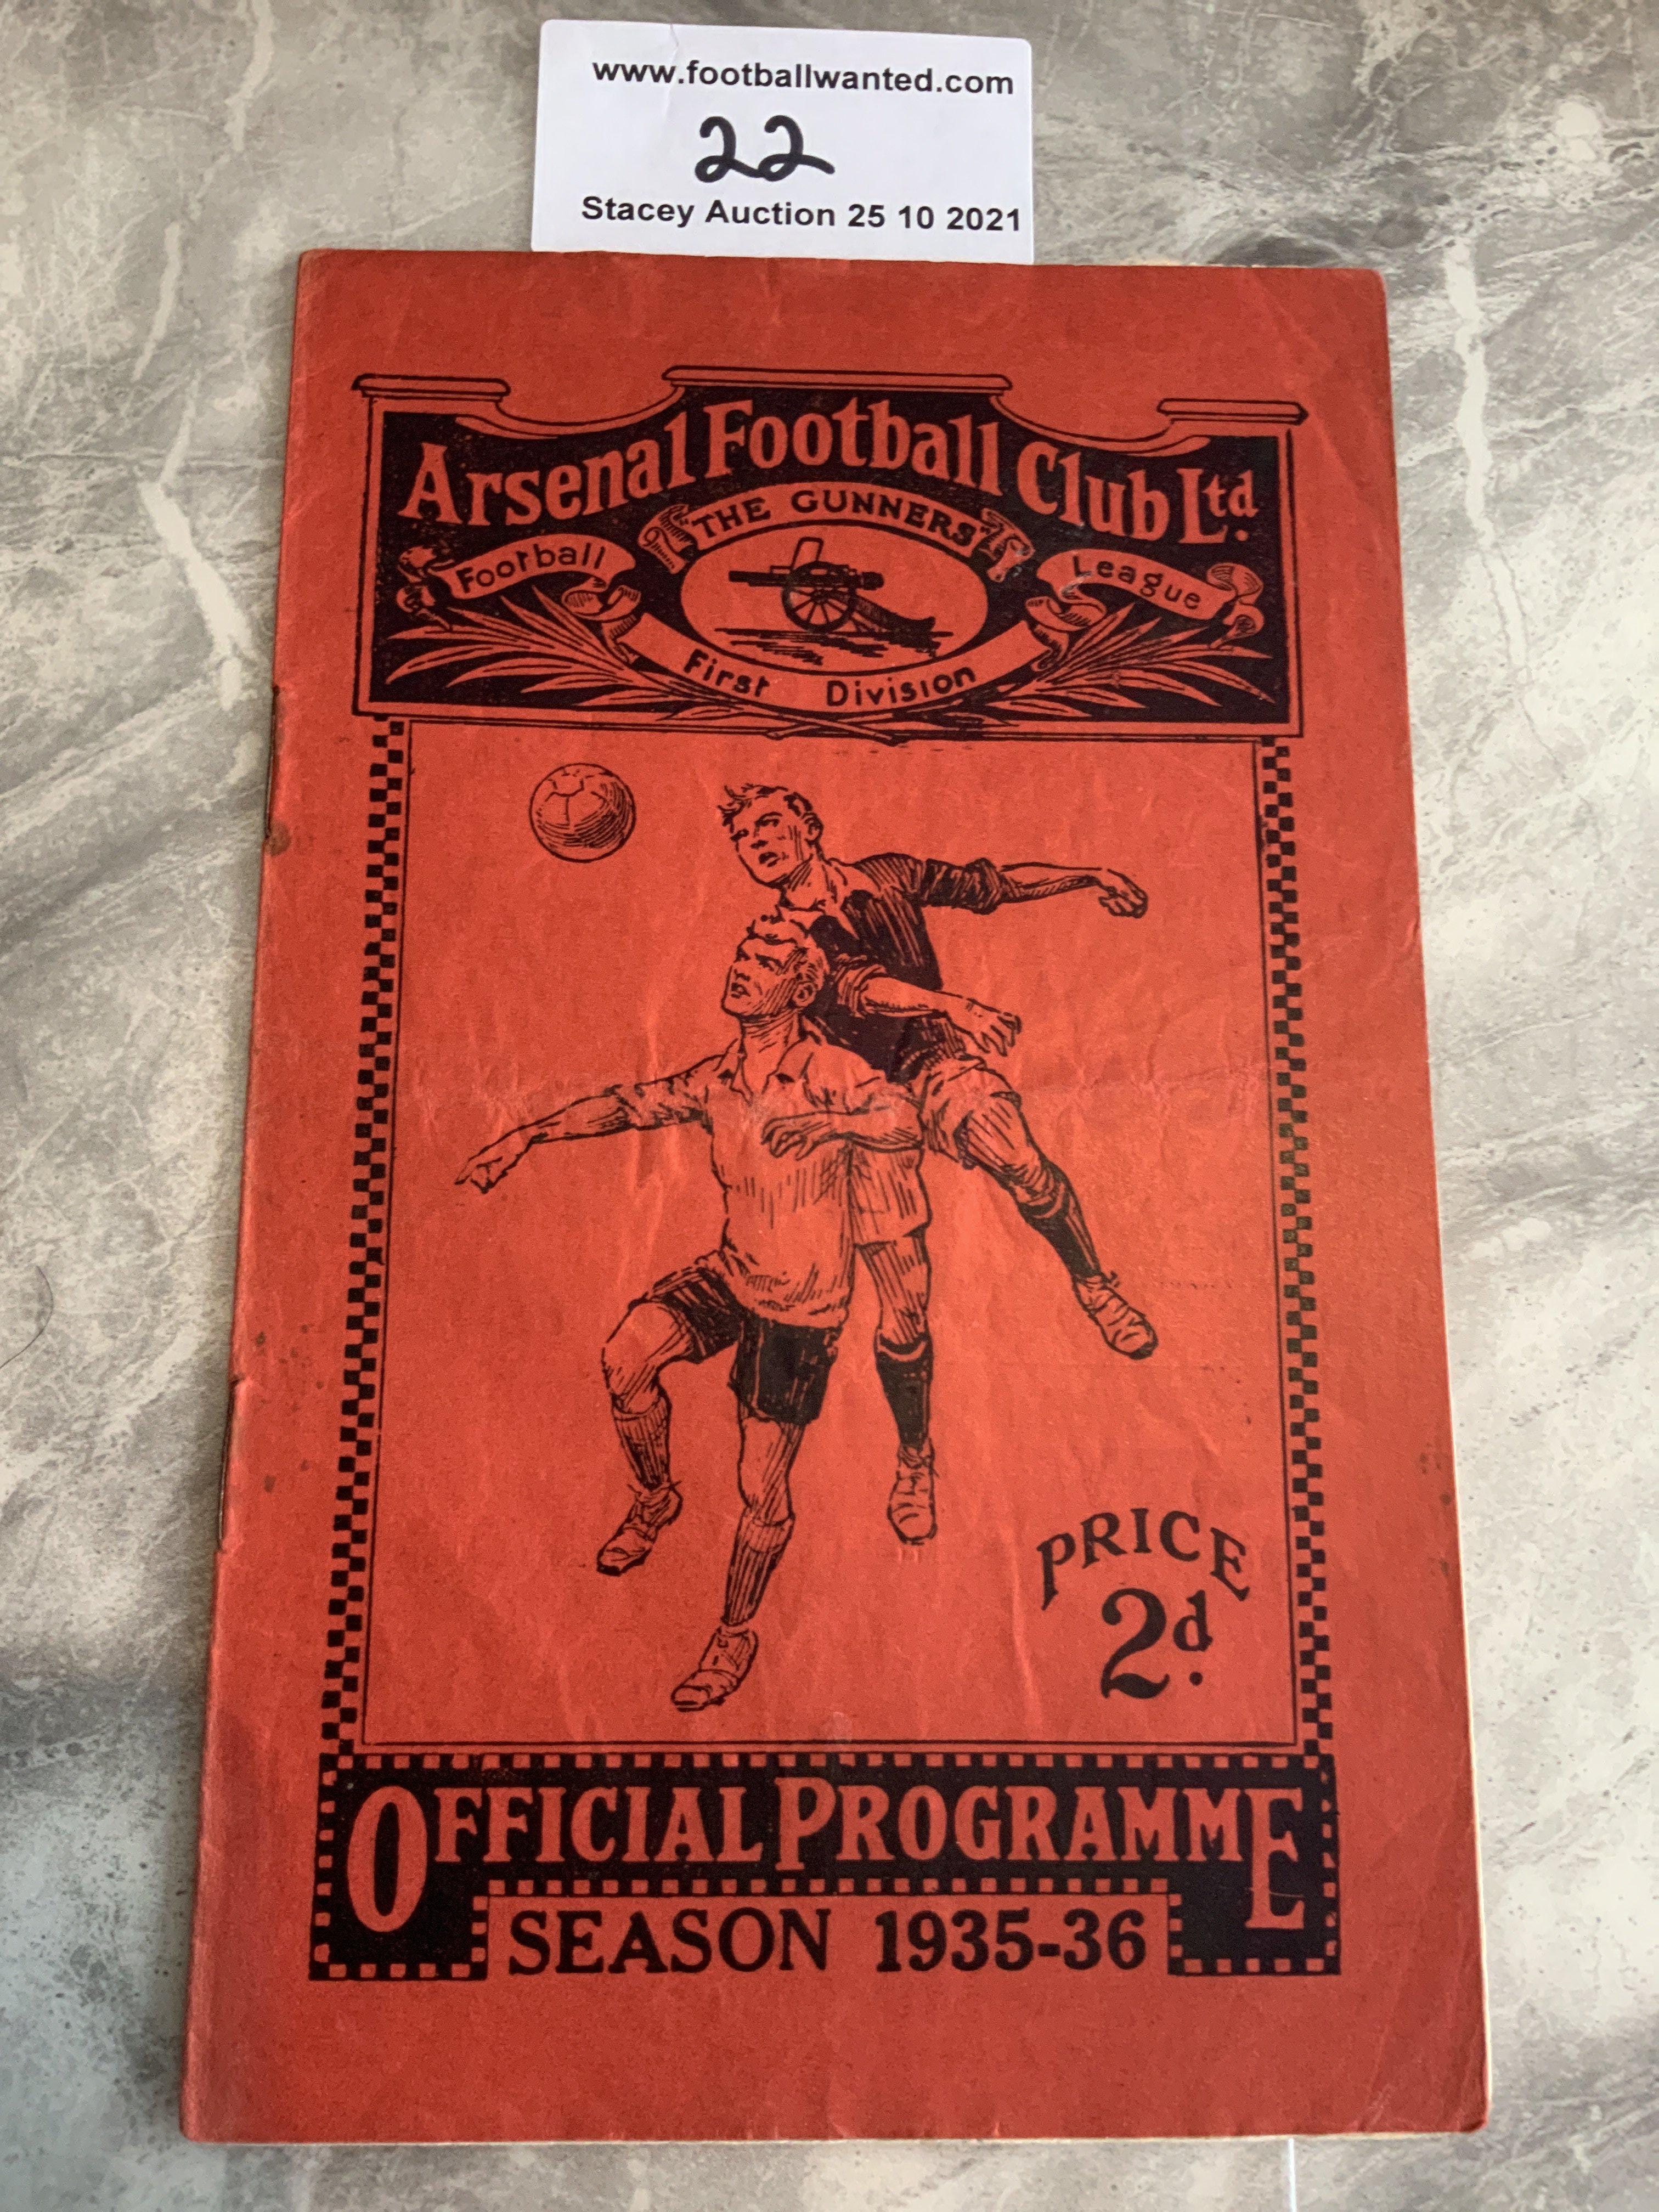 35/36 Arsenal v West Brom Football Programme: Good condition with no team changes. Rusty staples